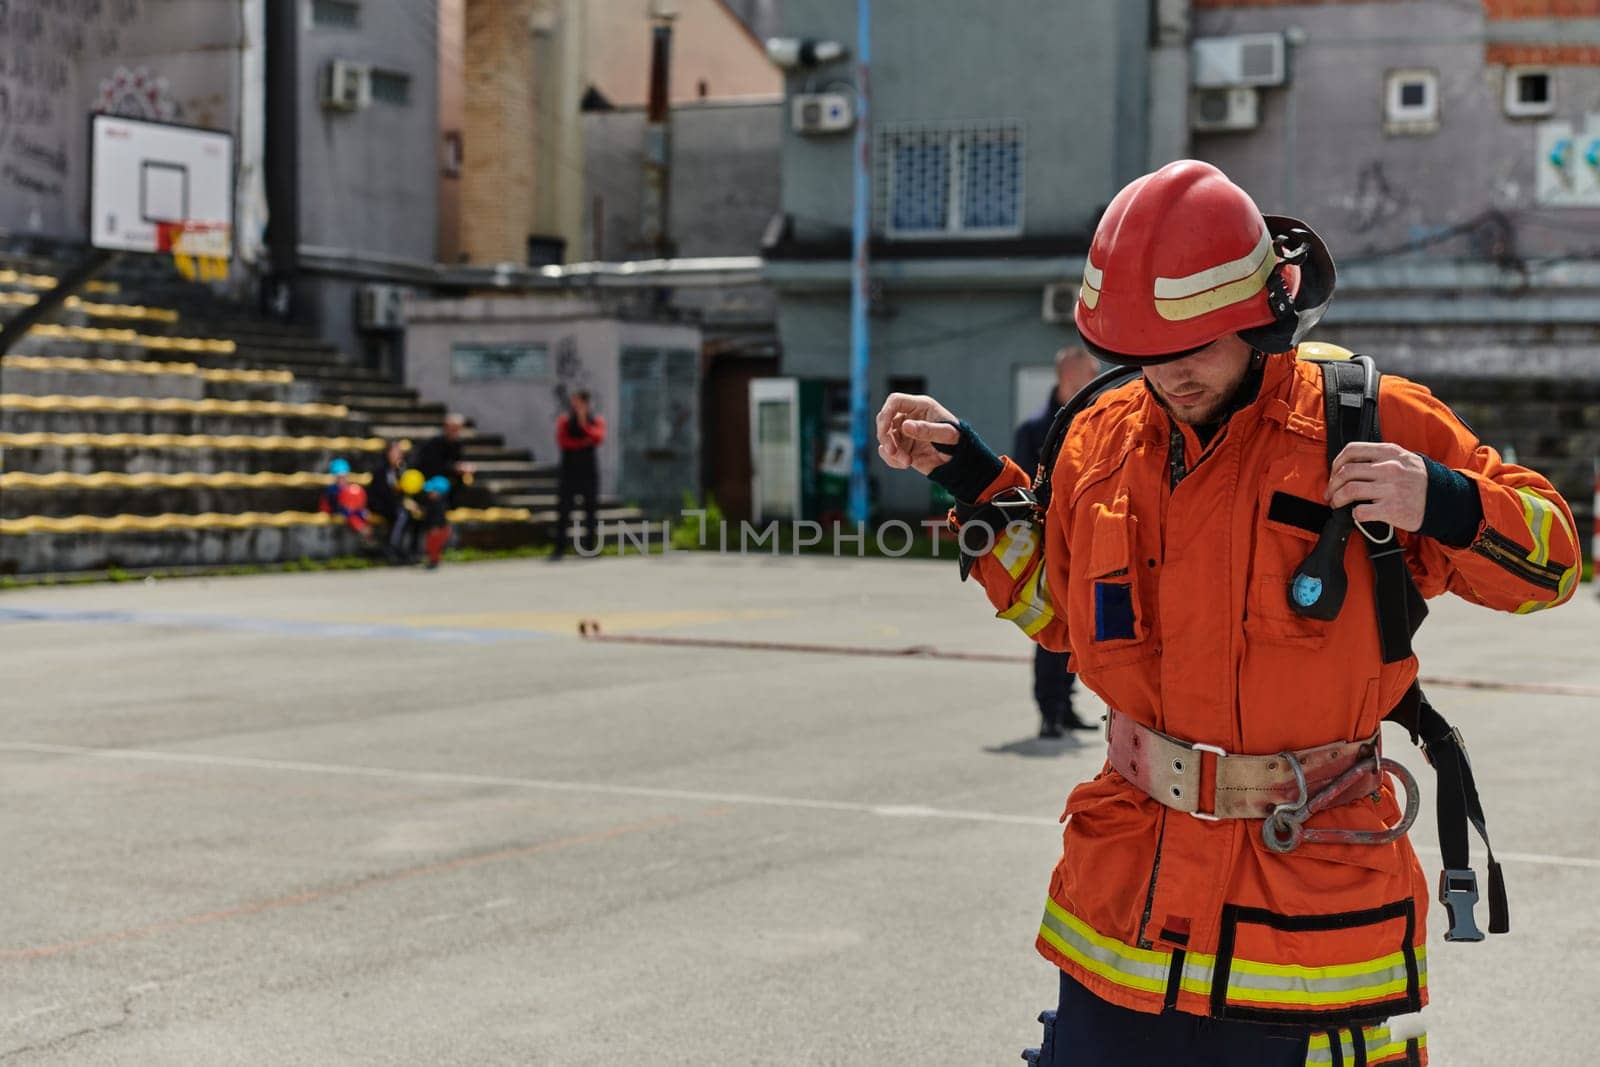 Professional Firefighter Suits Up in Full Gear for Duty by dotshock